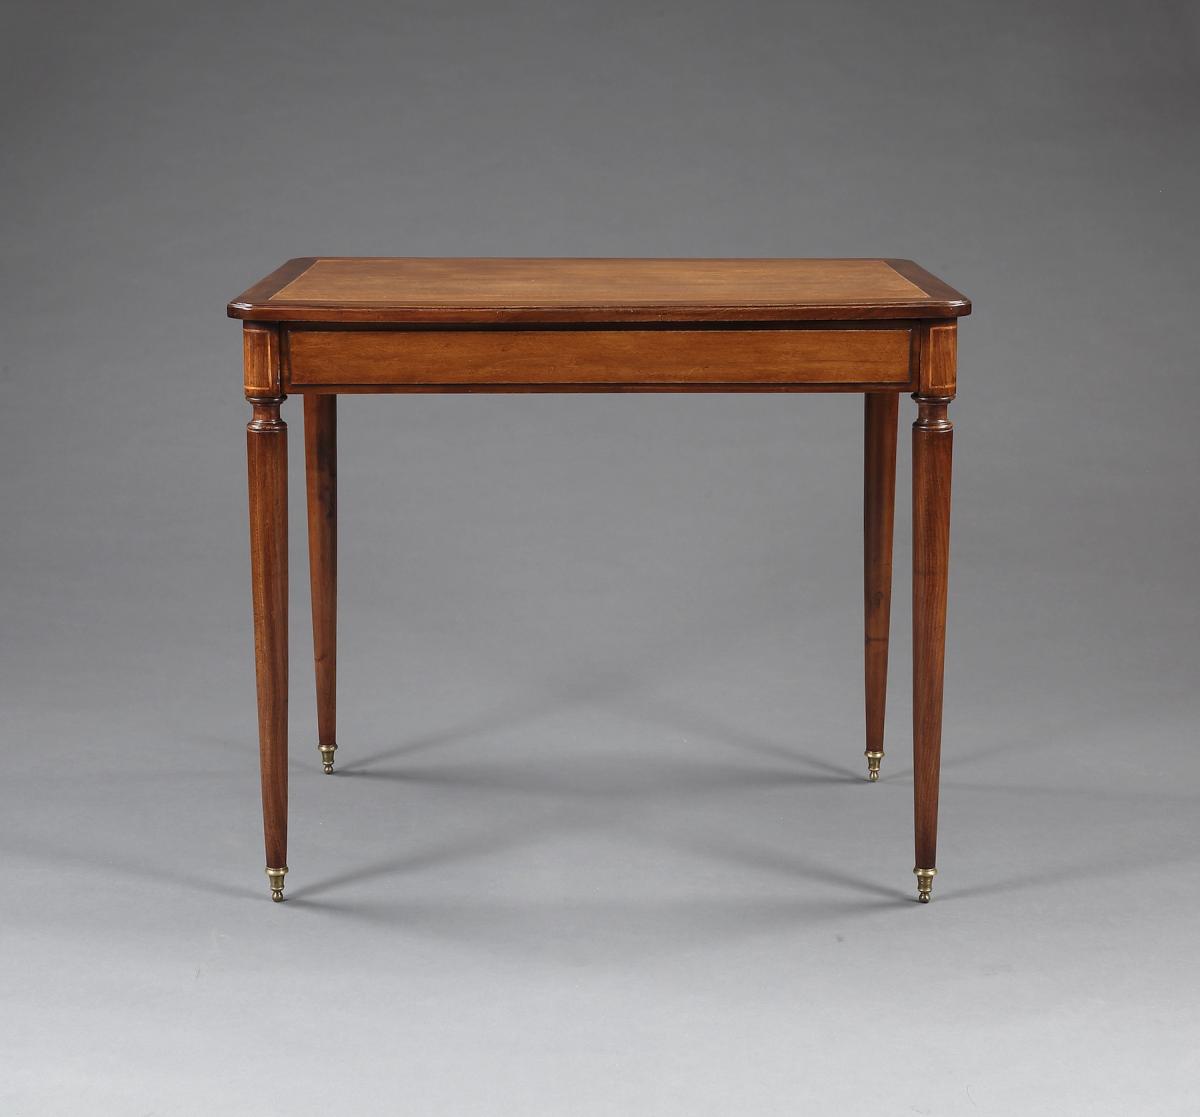 A Pair Of Mahogany And Birds Eye Maple Rectangular Occasional Tables In The Directoire Taste